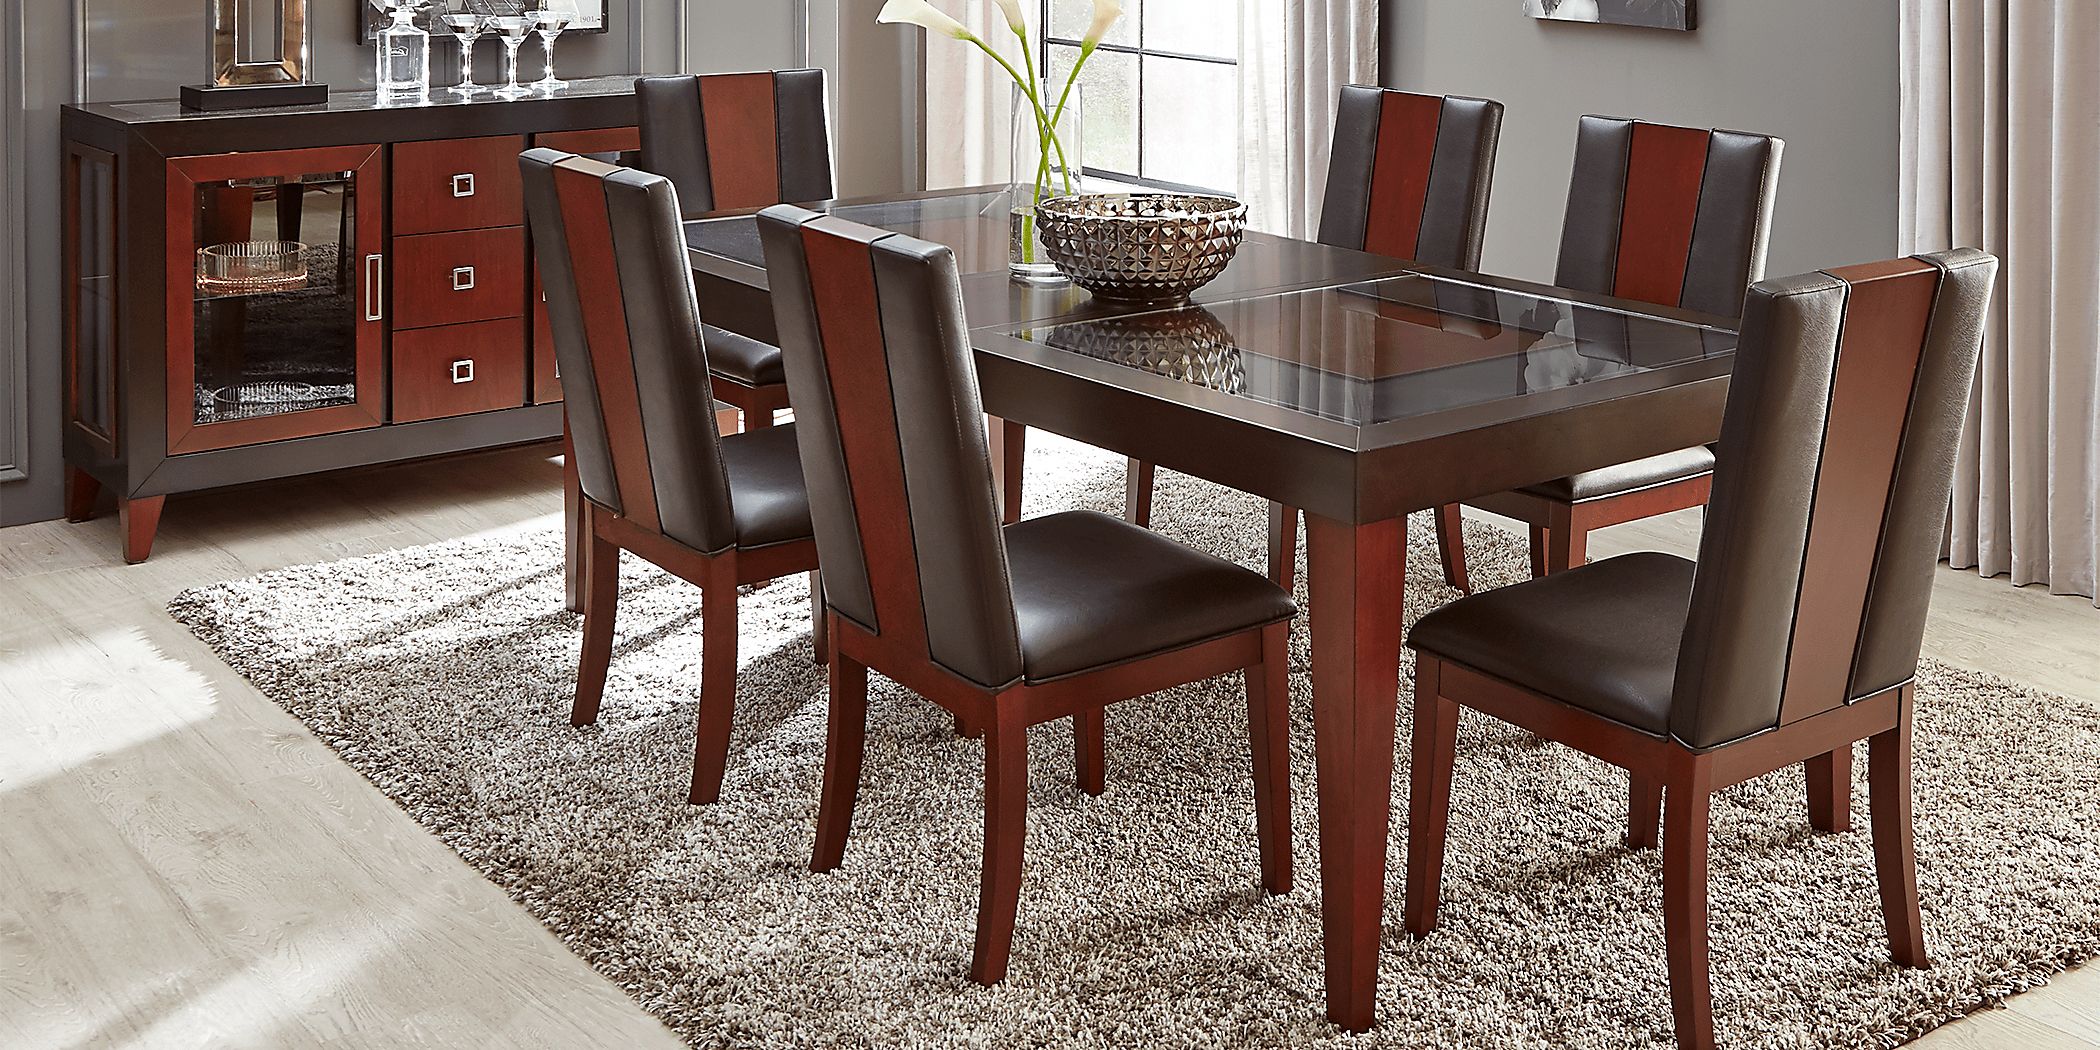 Aylesbury Brown Cherry 7 Pc Rectangle Dining Room